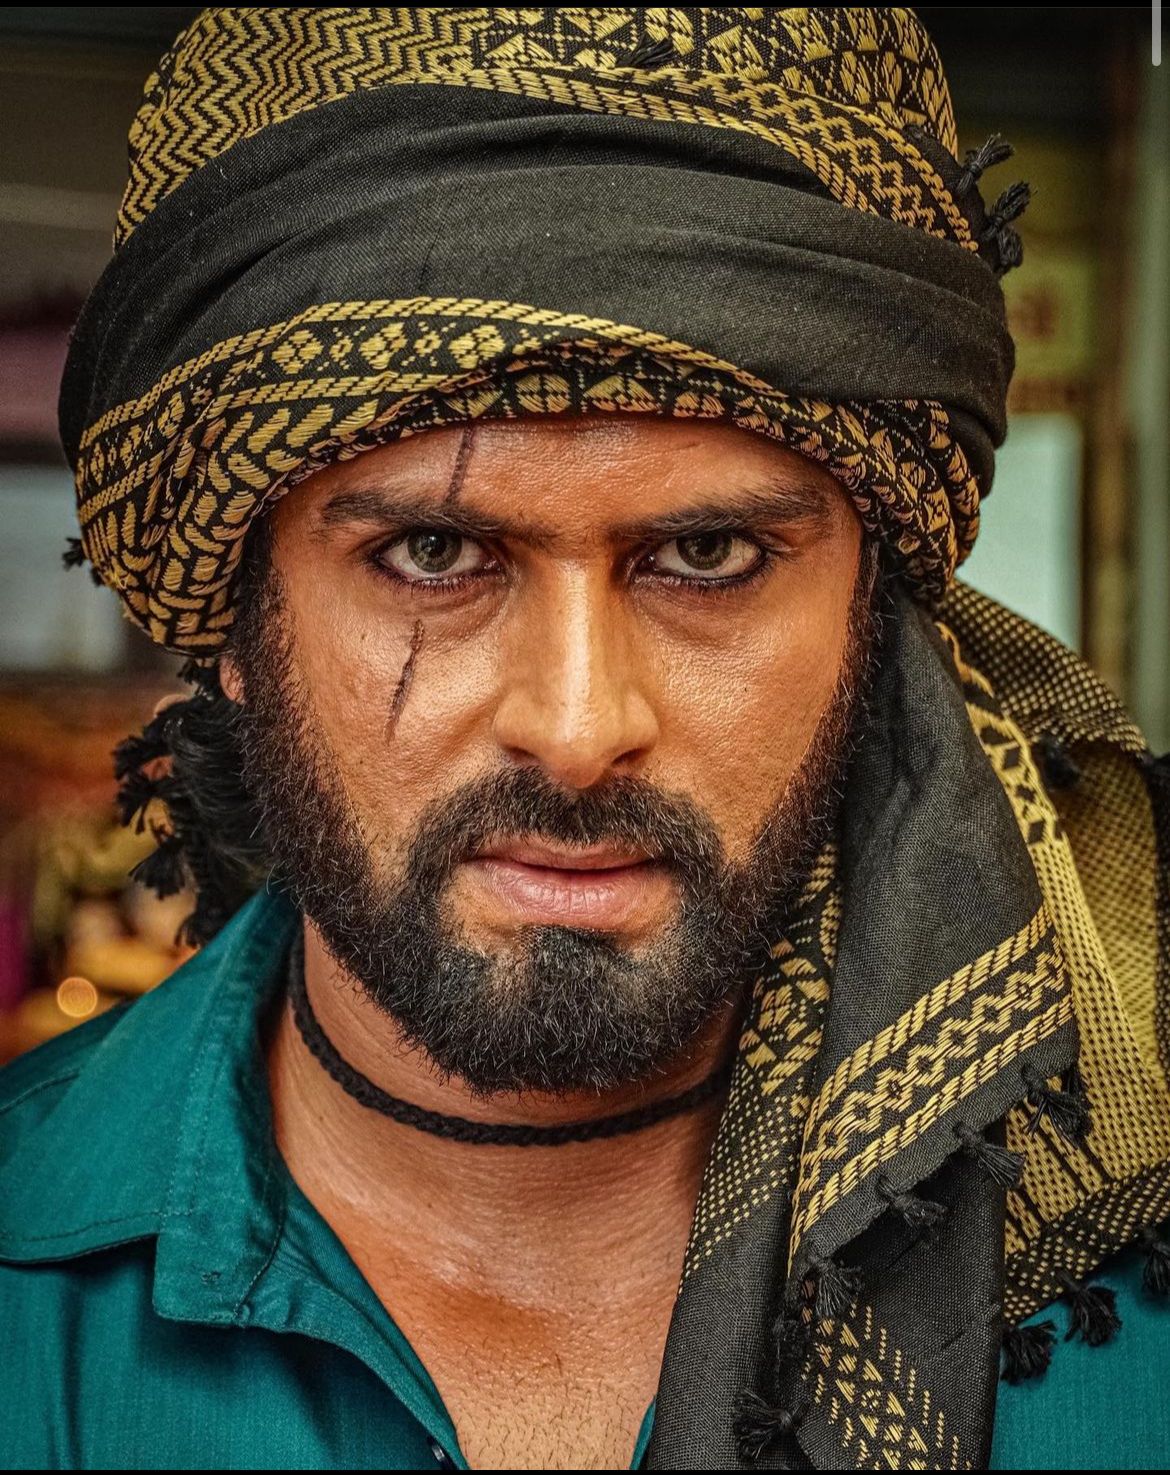 Shoaib Embraces the Peshawari Dialect to Perfectly Disguise his Role as ‘Pathan’ the bodyguard in the Upcoming Track of 'Ajooni' on Star Bharat